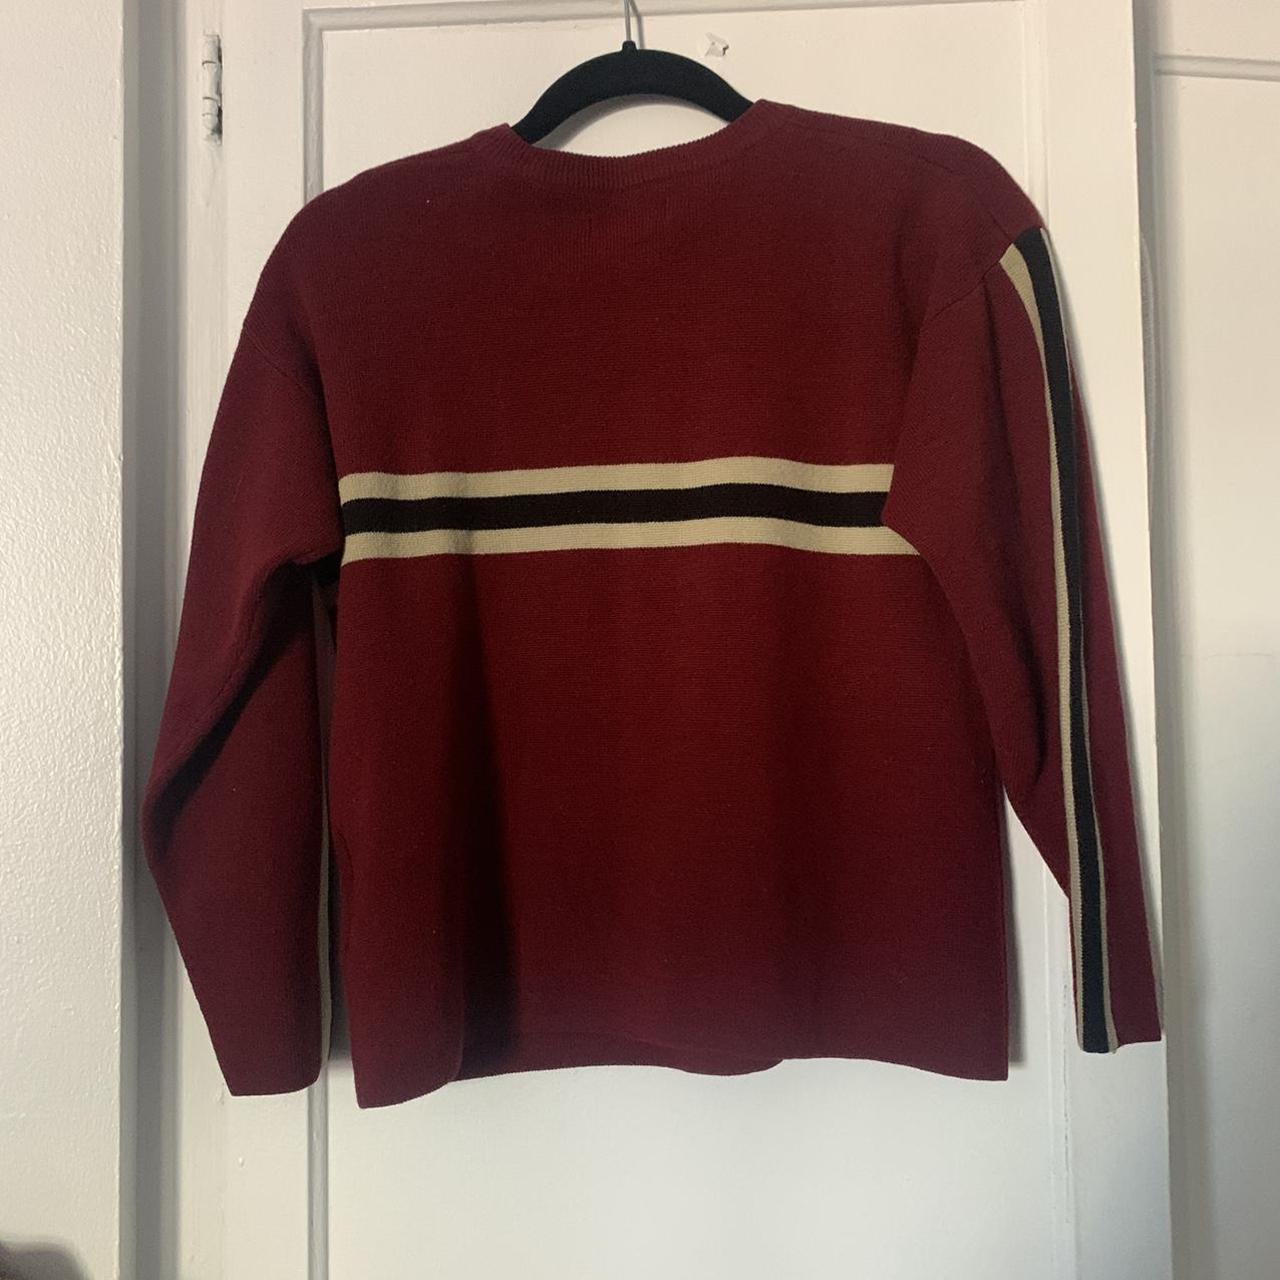 Union Bay Women's Red and Burgundy Jumper | Depop